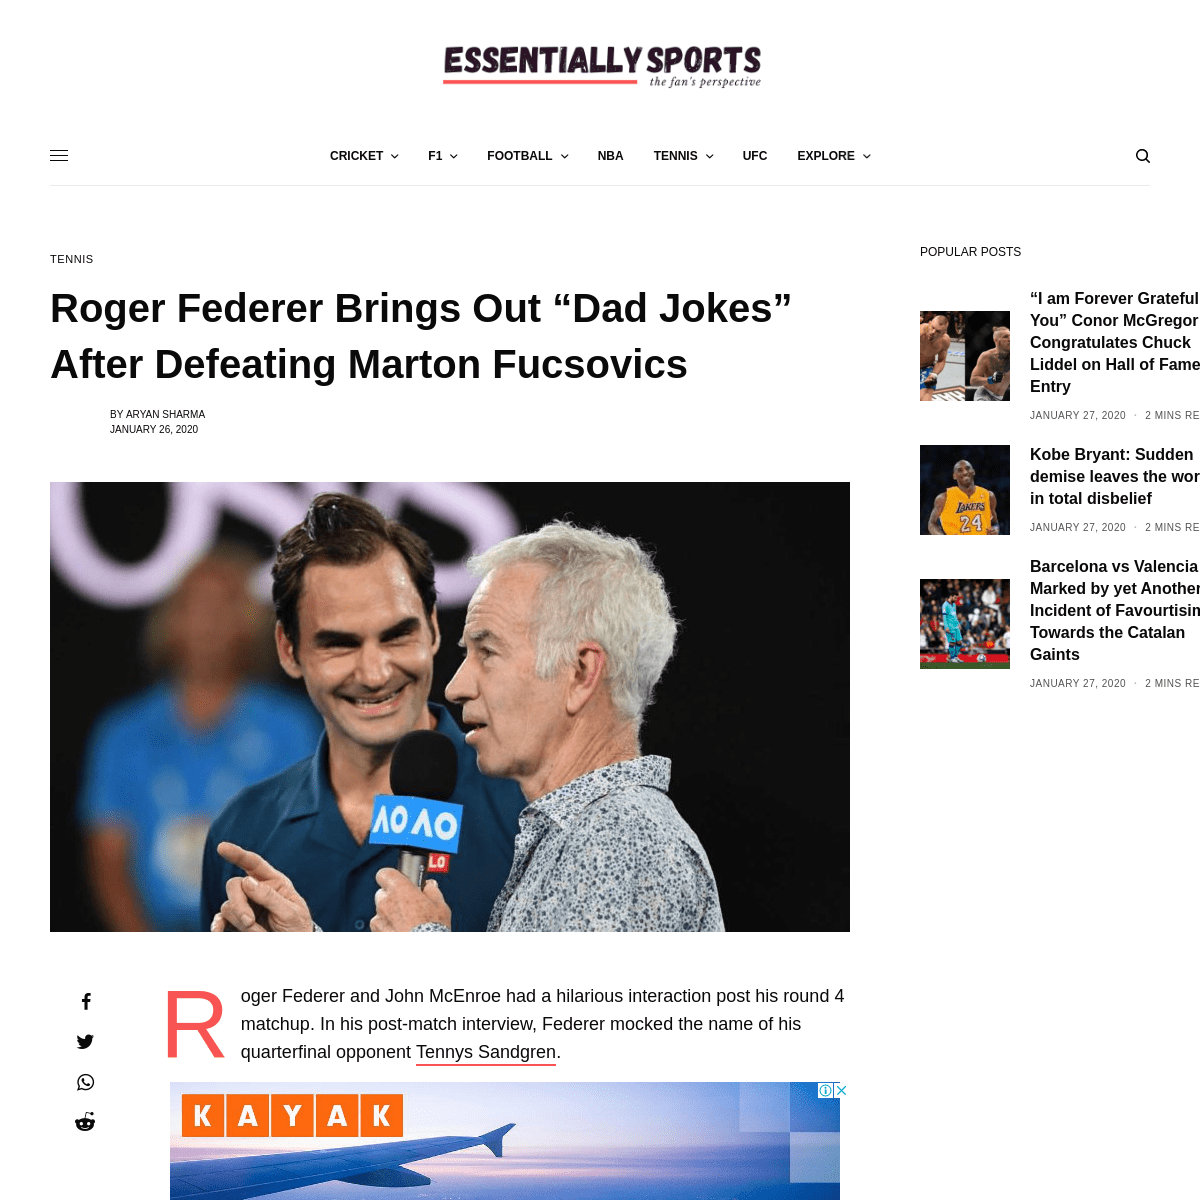 A complete backup of www.essentiallysports.com/roger-federer-brings-out-dad-jokes-after-defeating-marton-fucsovics-austrslian-op